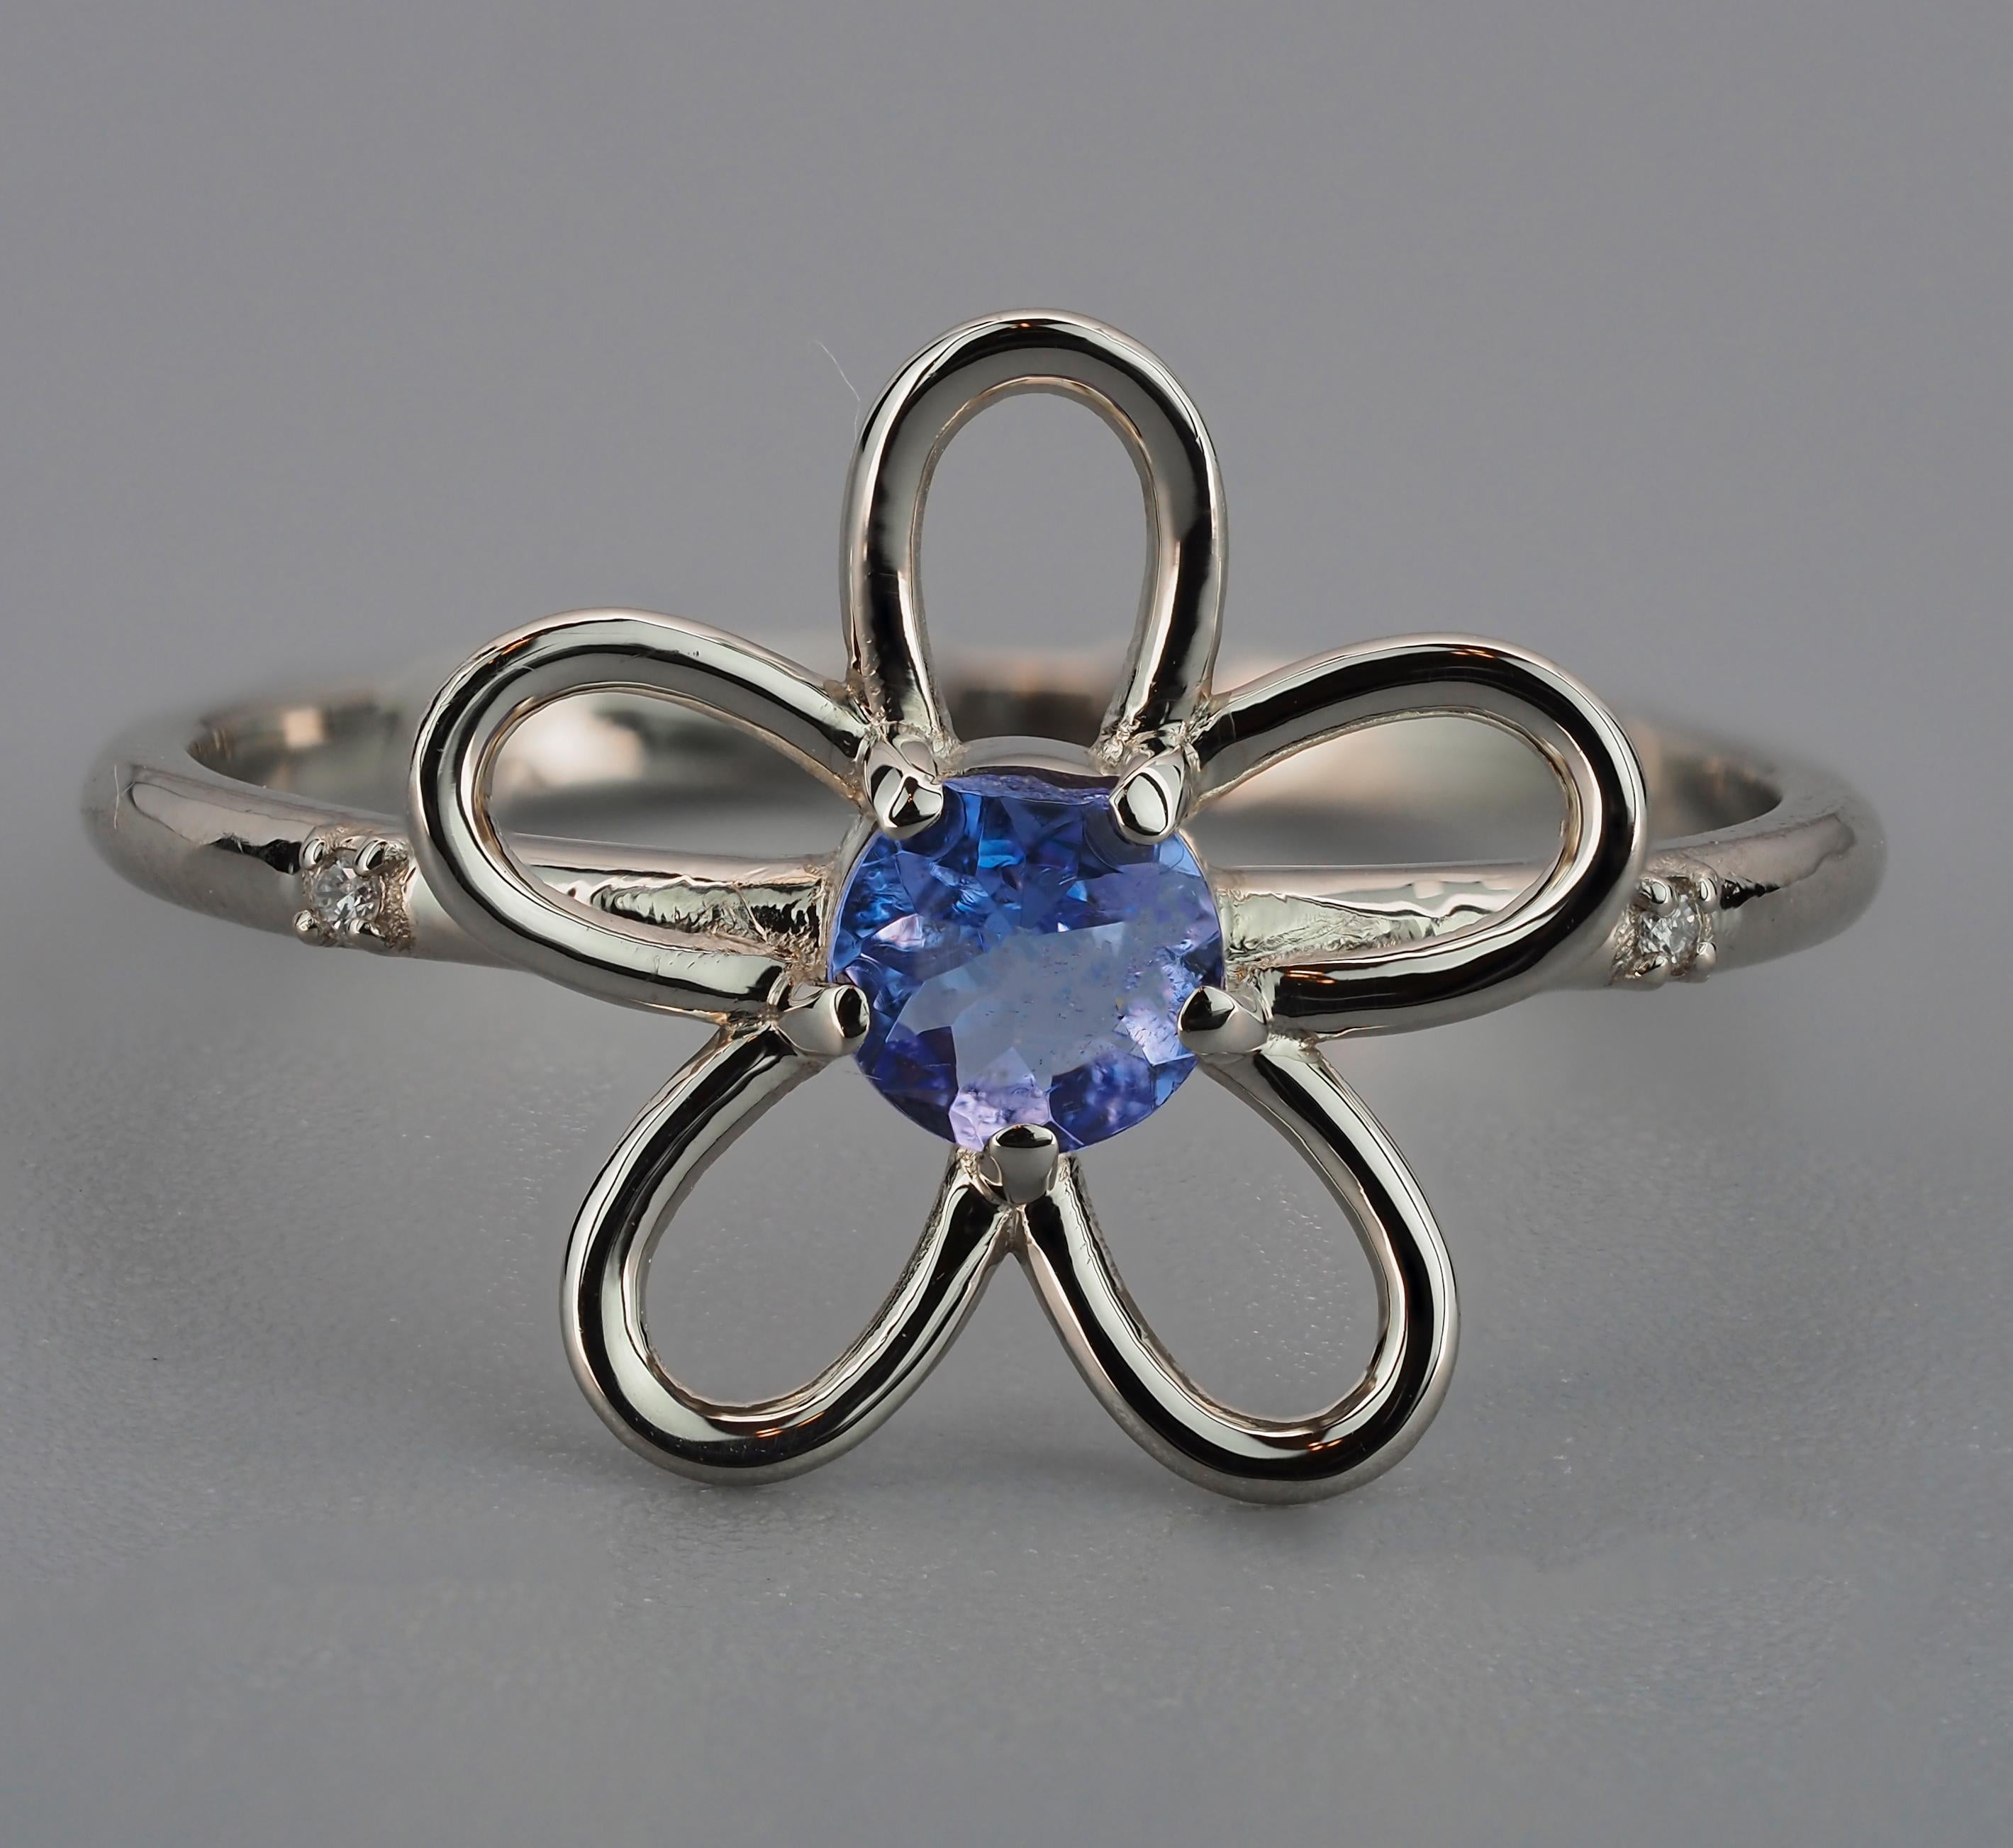 Flower gold ring with tanzanite. 
Round Tanzanite 14k gold ring. Minimalist ring. December Birthstone ring. Dainty tanzanite ring Ring.

Metal: 14k gold
Weight: 1.5 g. depends from size.

Main Stone: tanzanite
Shape: round
Color: blue.

Surrounding